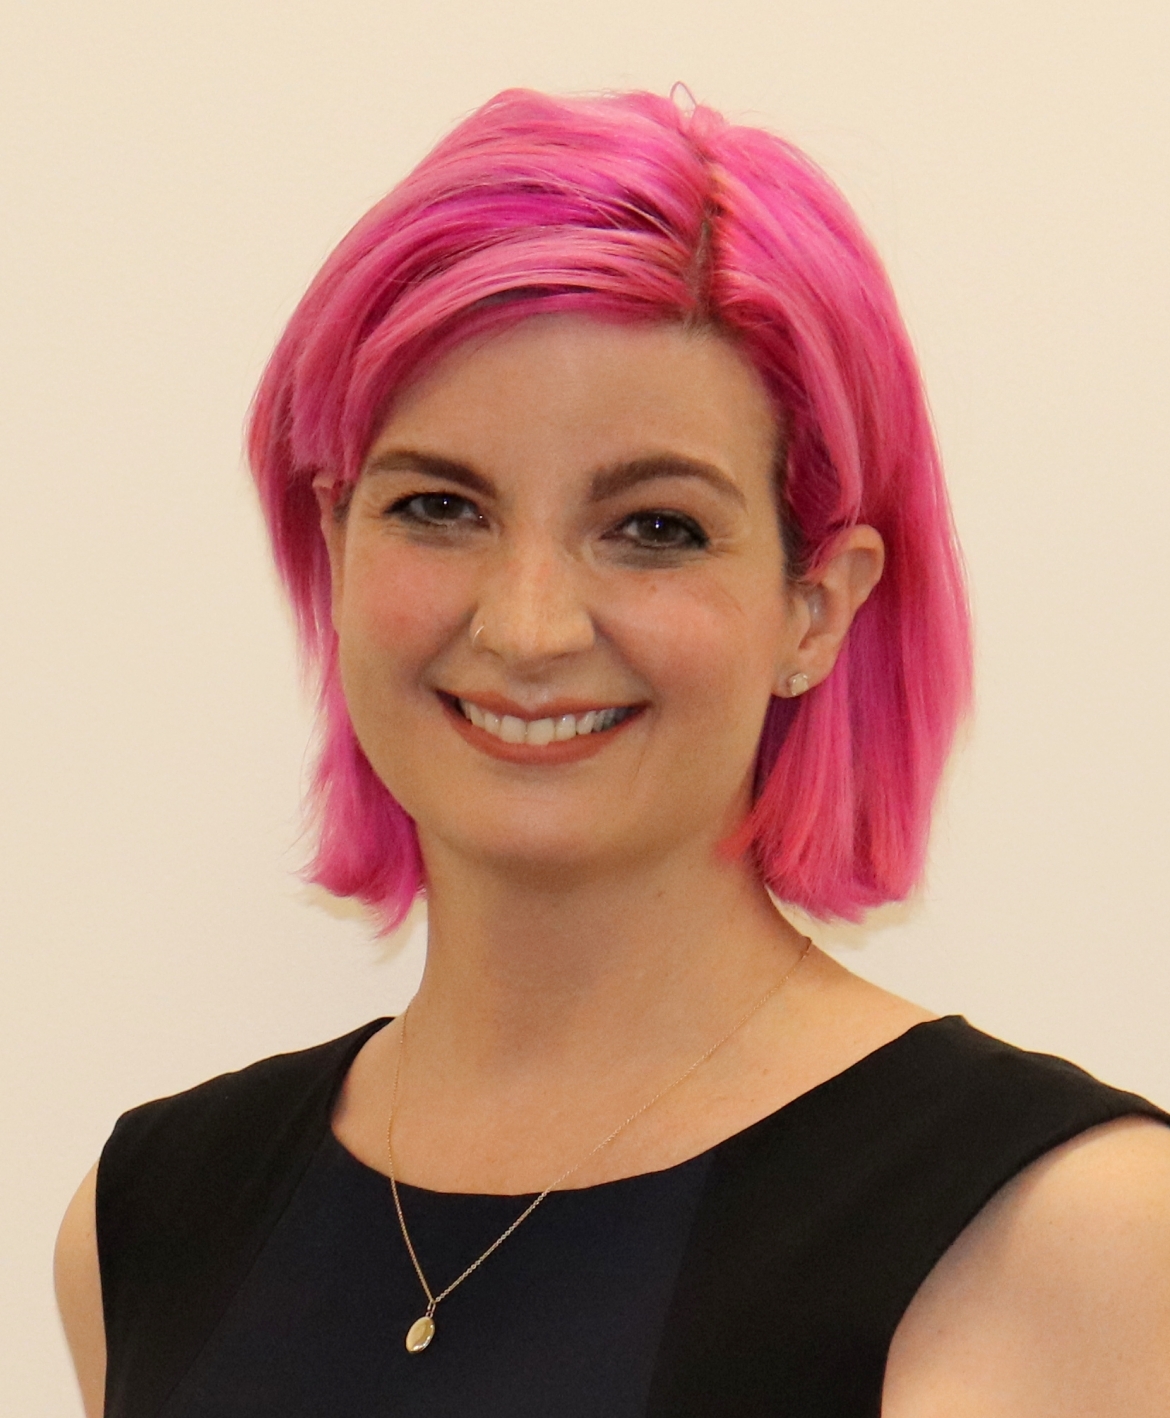 A woman with pink hair and a black top.